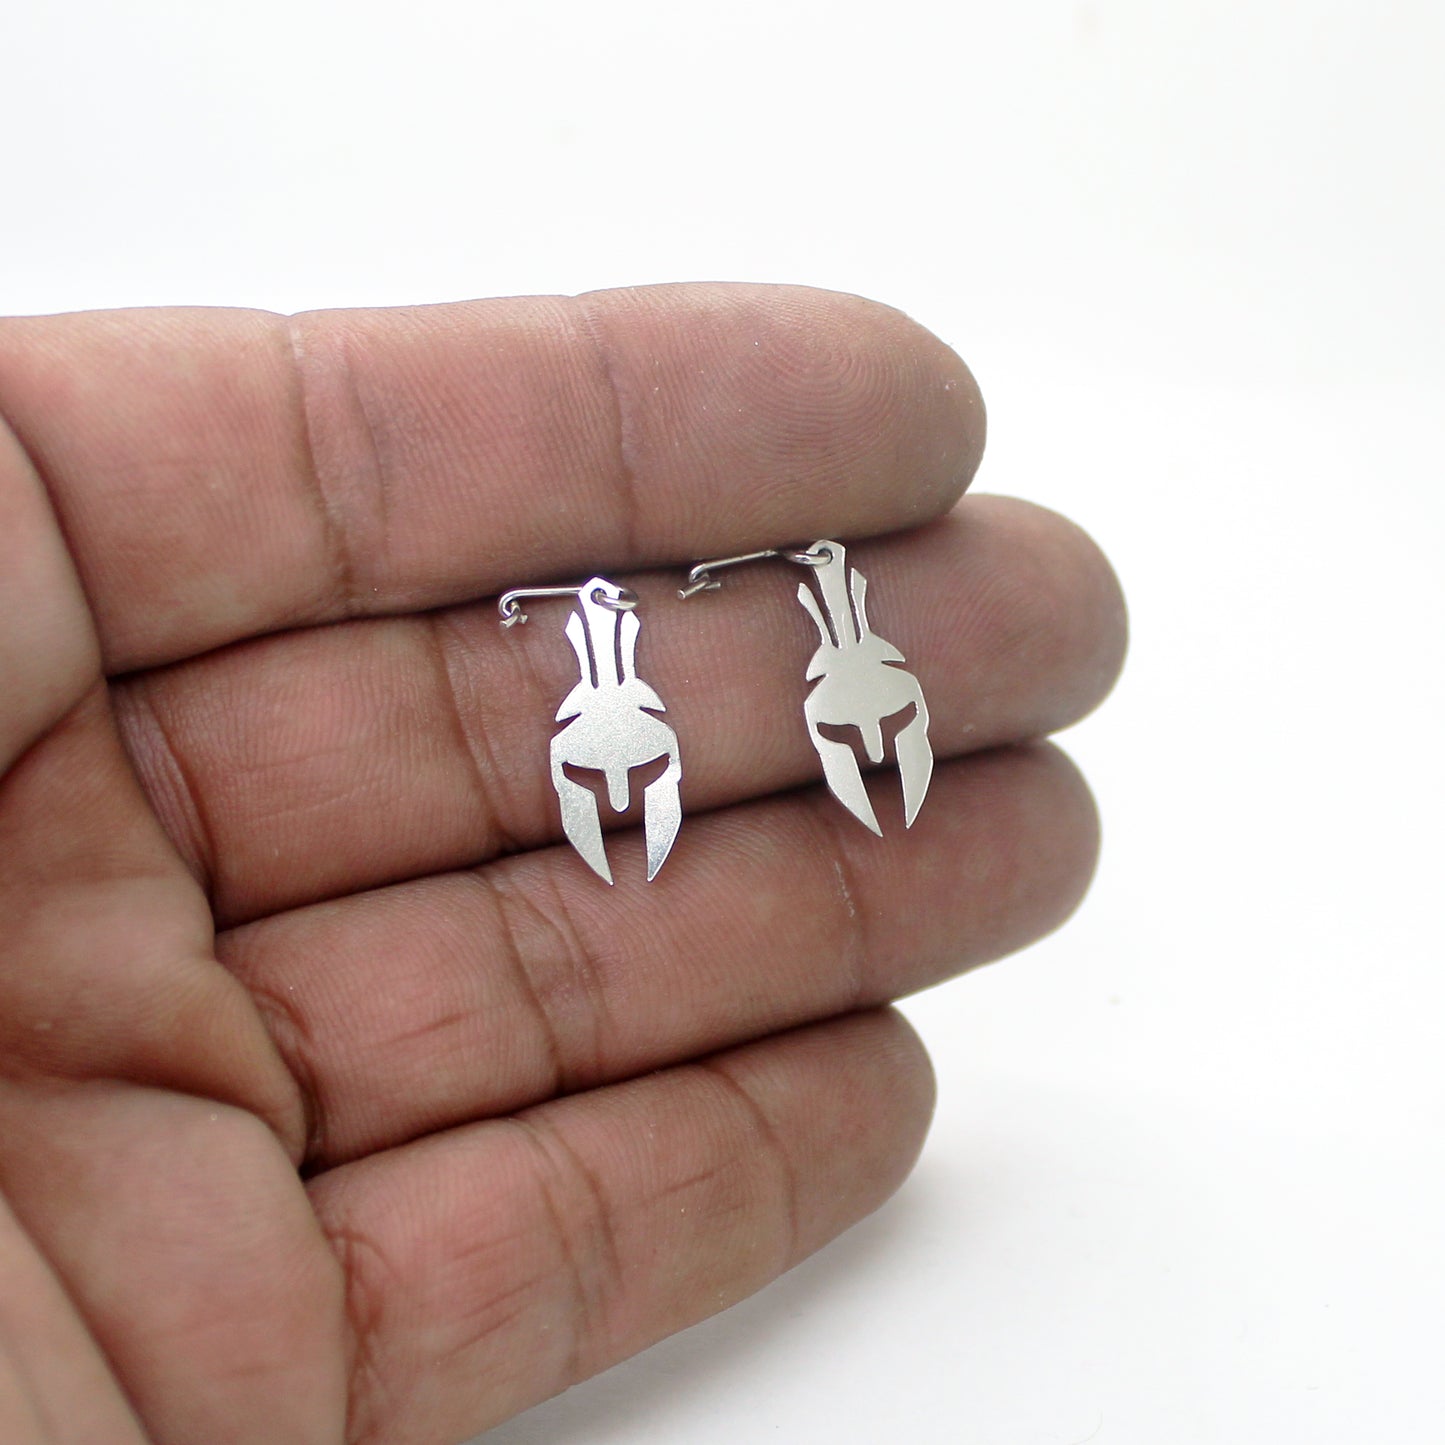 Assassin's Creed Odyssey inspiration dangle earrings in 925 silver